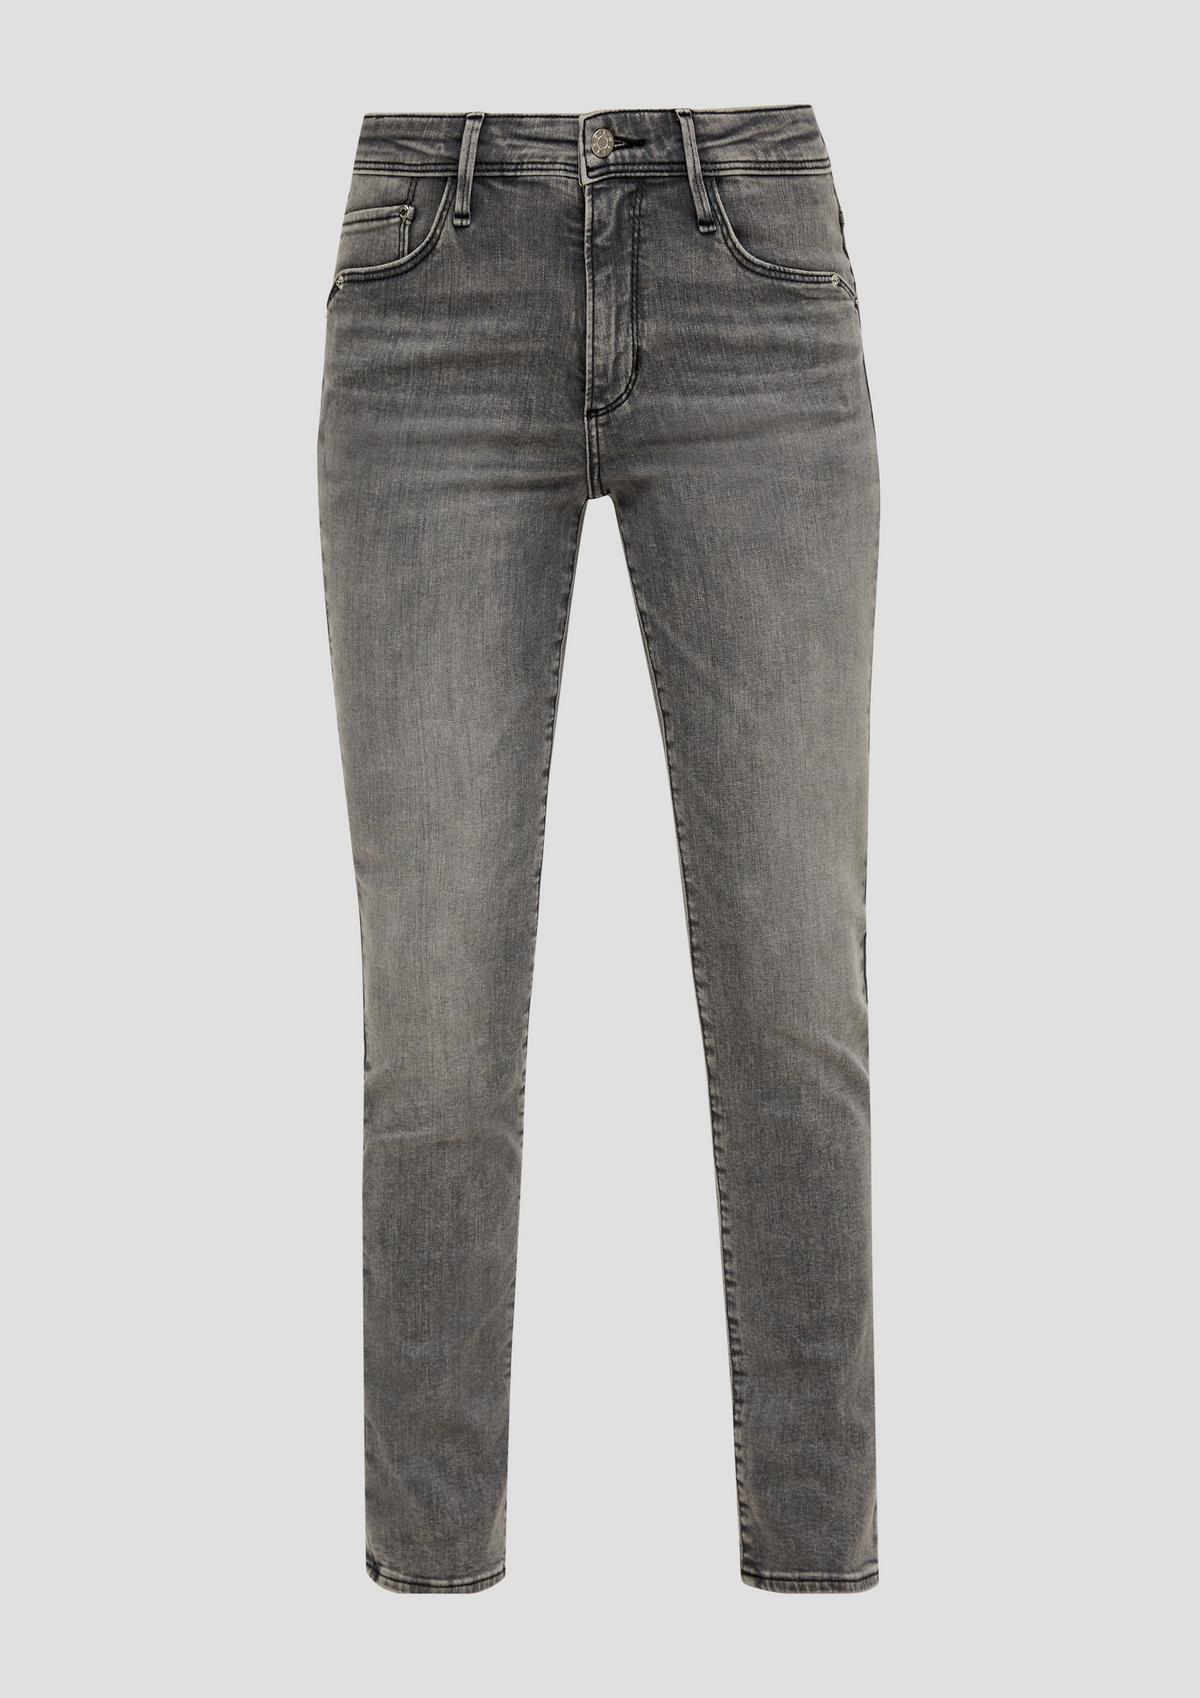 s.Oliver Betsy Jeans / Slim Fit / Mid Rise / Slim Leg / Stretch Cotton